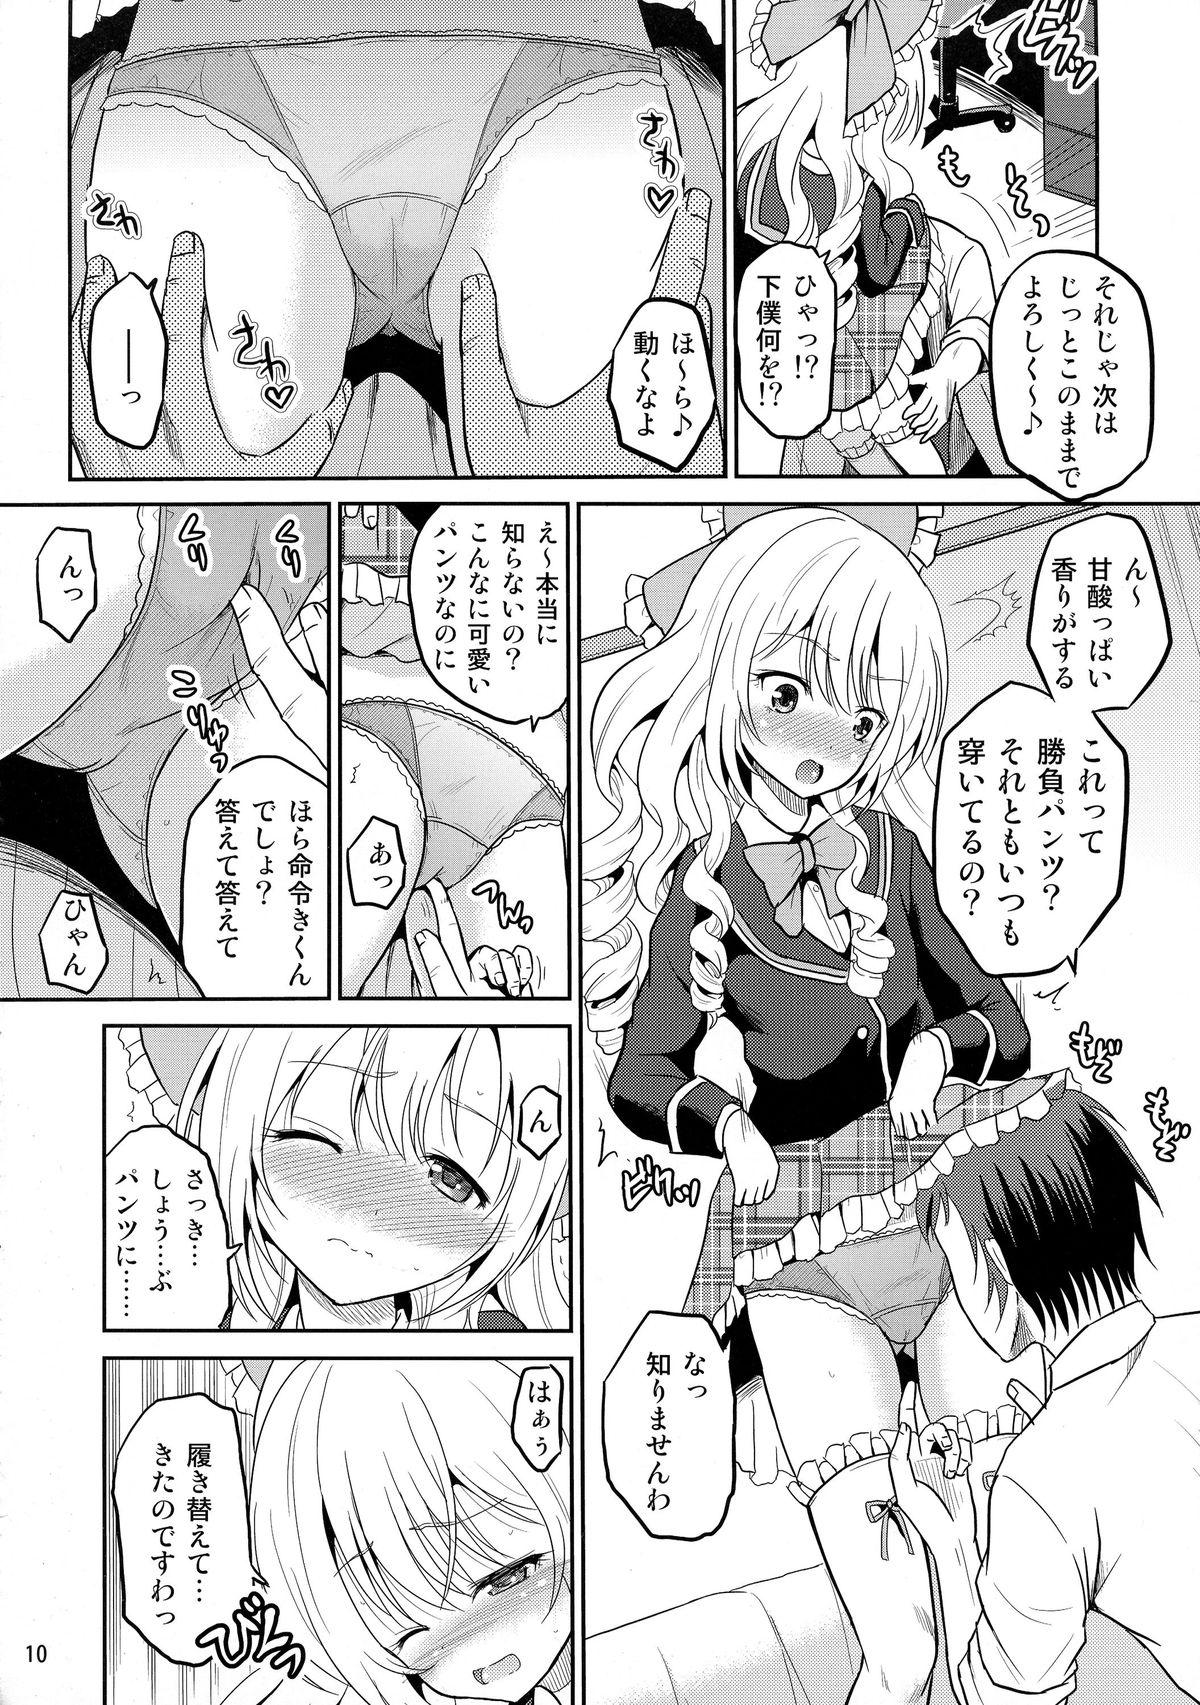 Innocent Arcanum 8 - Girl friend beta Picked Up - Page 10